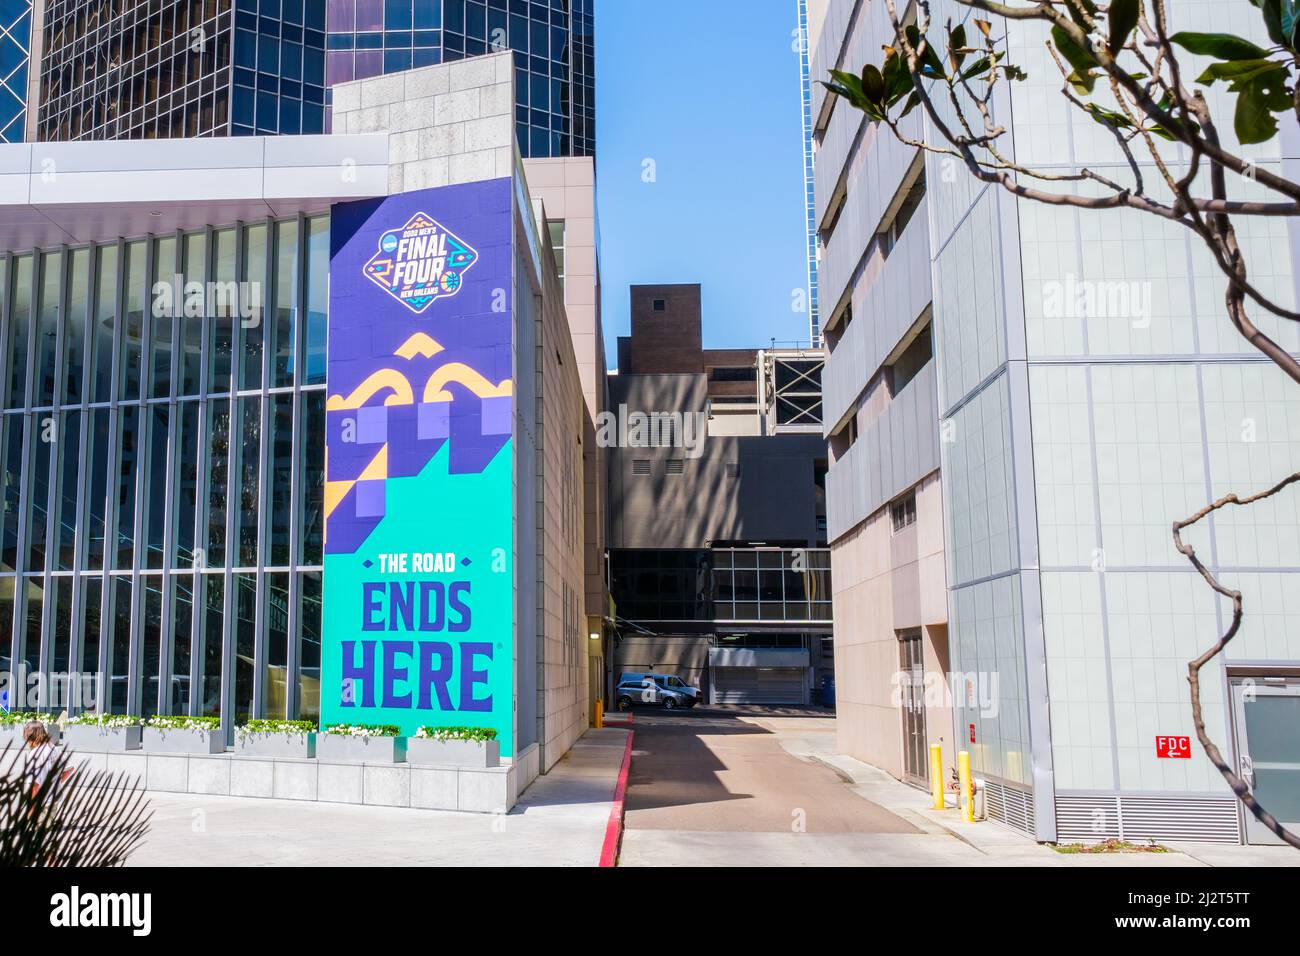 NEW ORLEANS, LA, USA - APRIL 3, 2022: NCAA Men's Final Four Basketball Banner on the side of the Hyatt Regency Hotel in the Central Business District Stock Photo